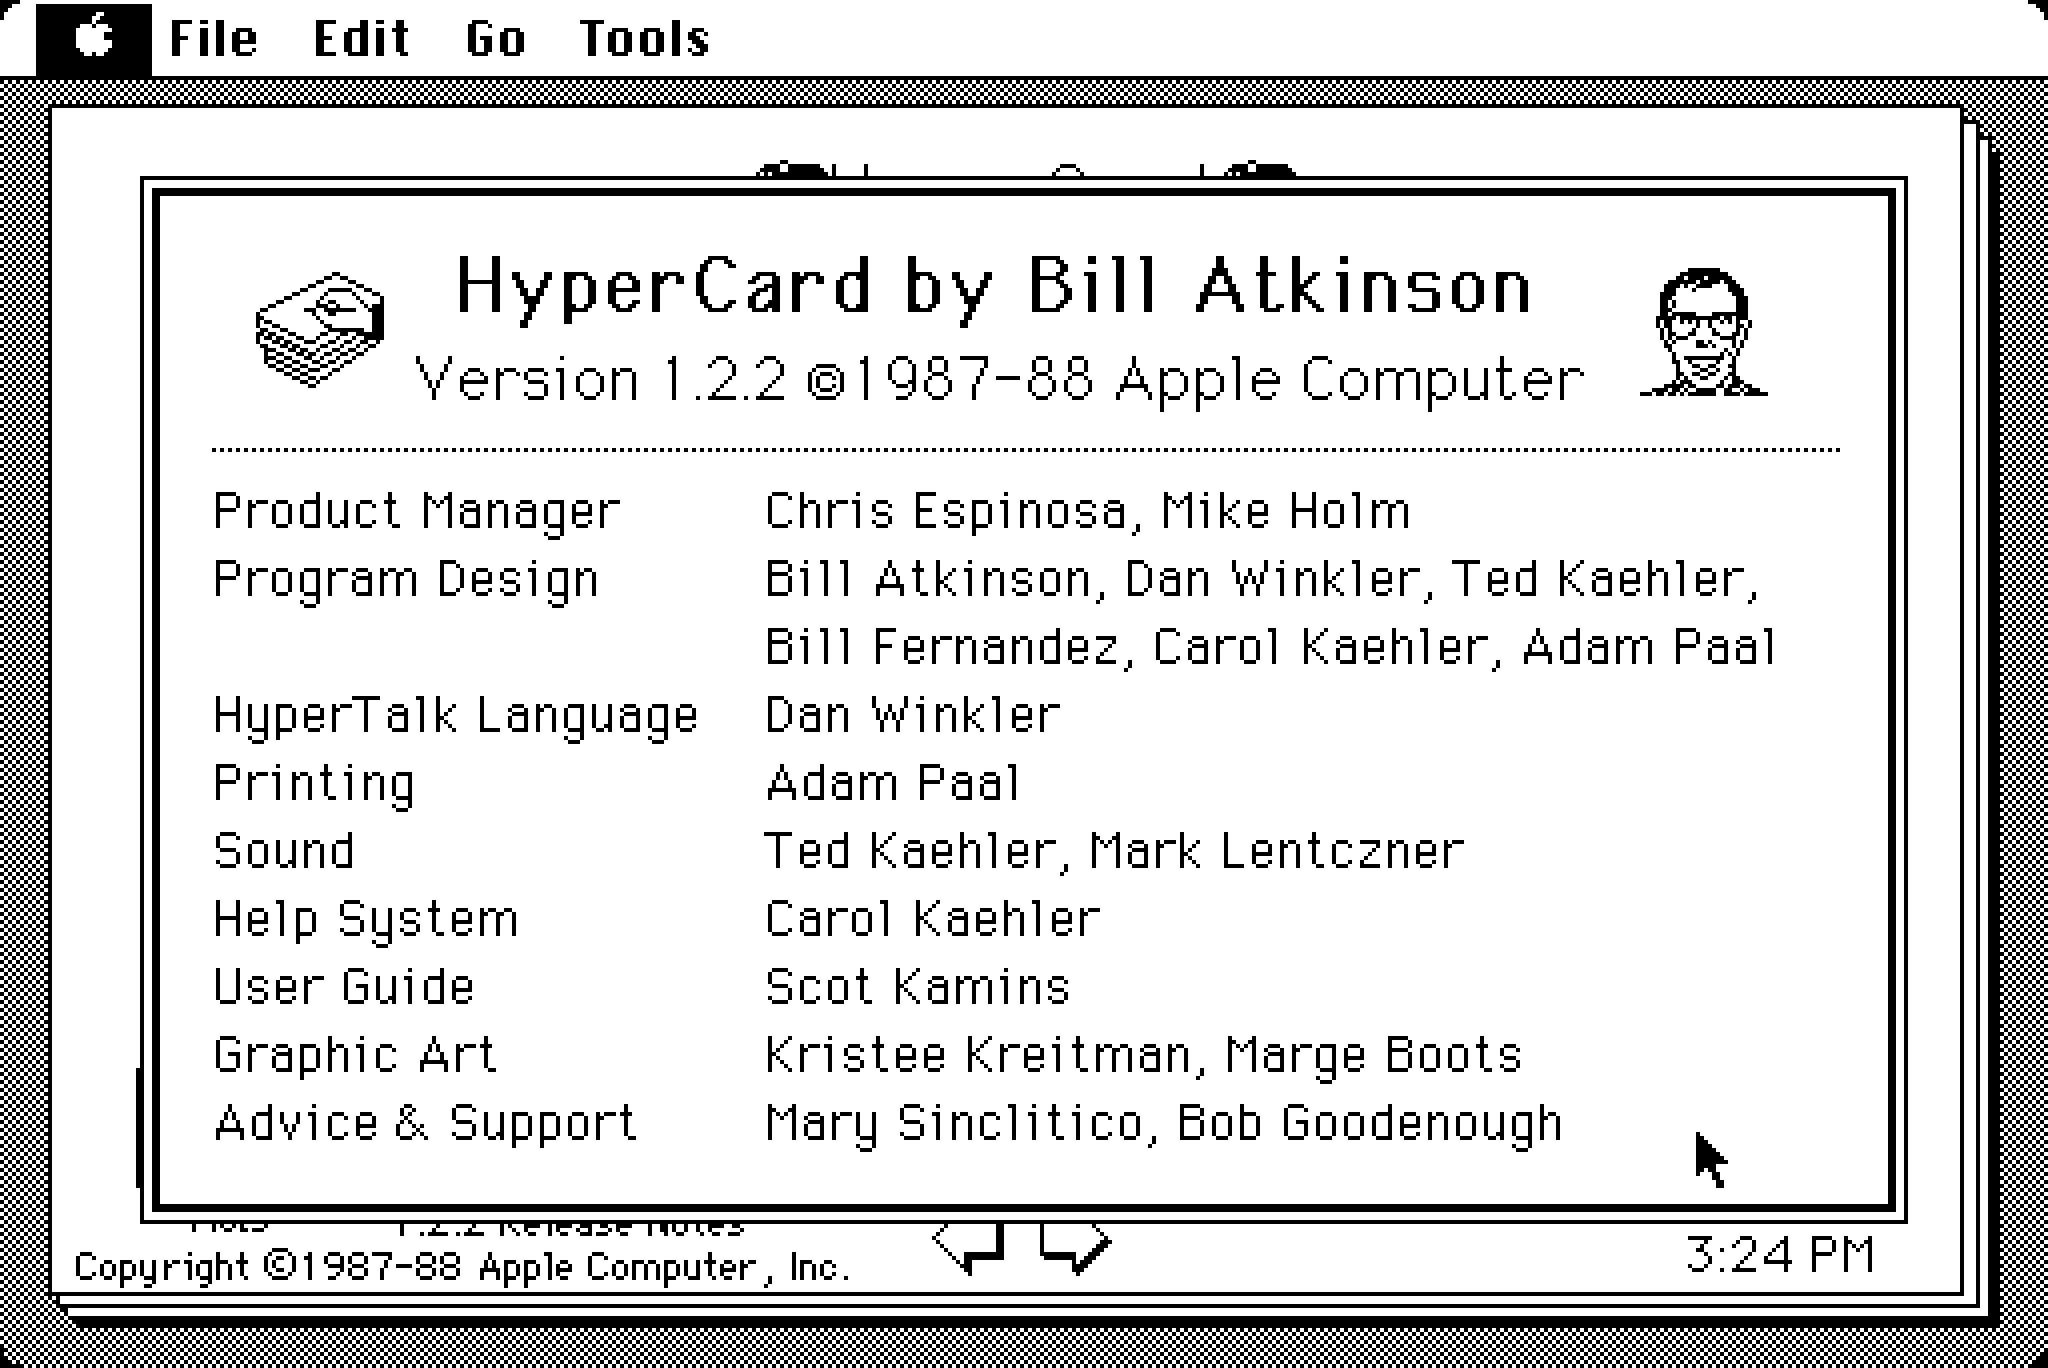 HyperCard. Image from WinWorld.